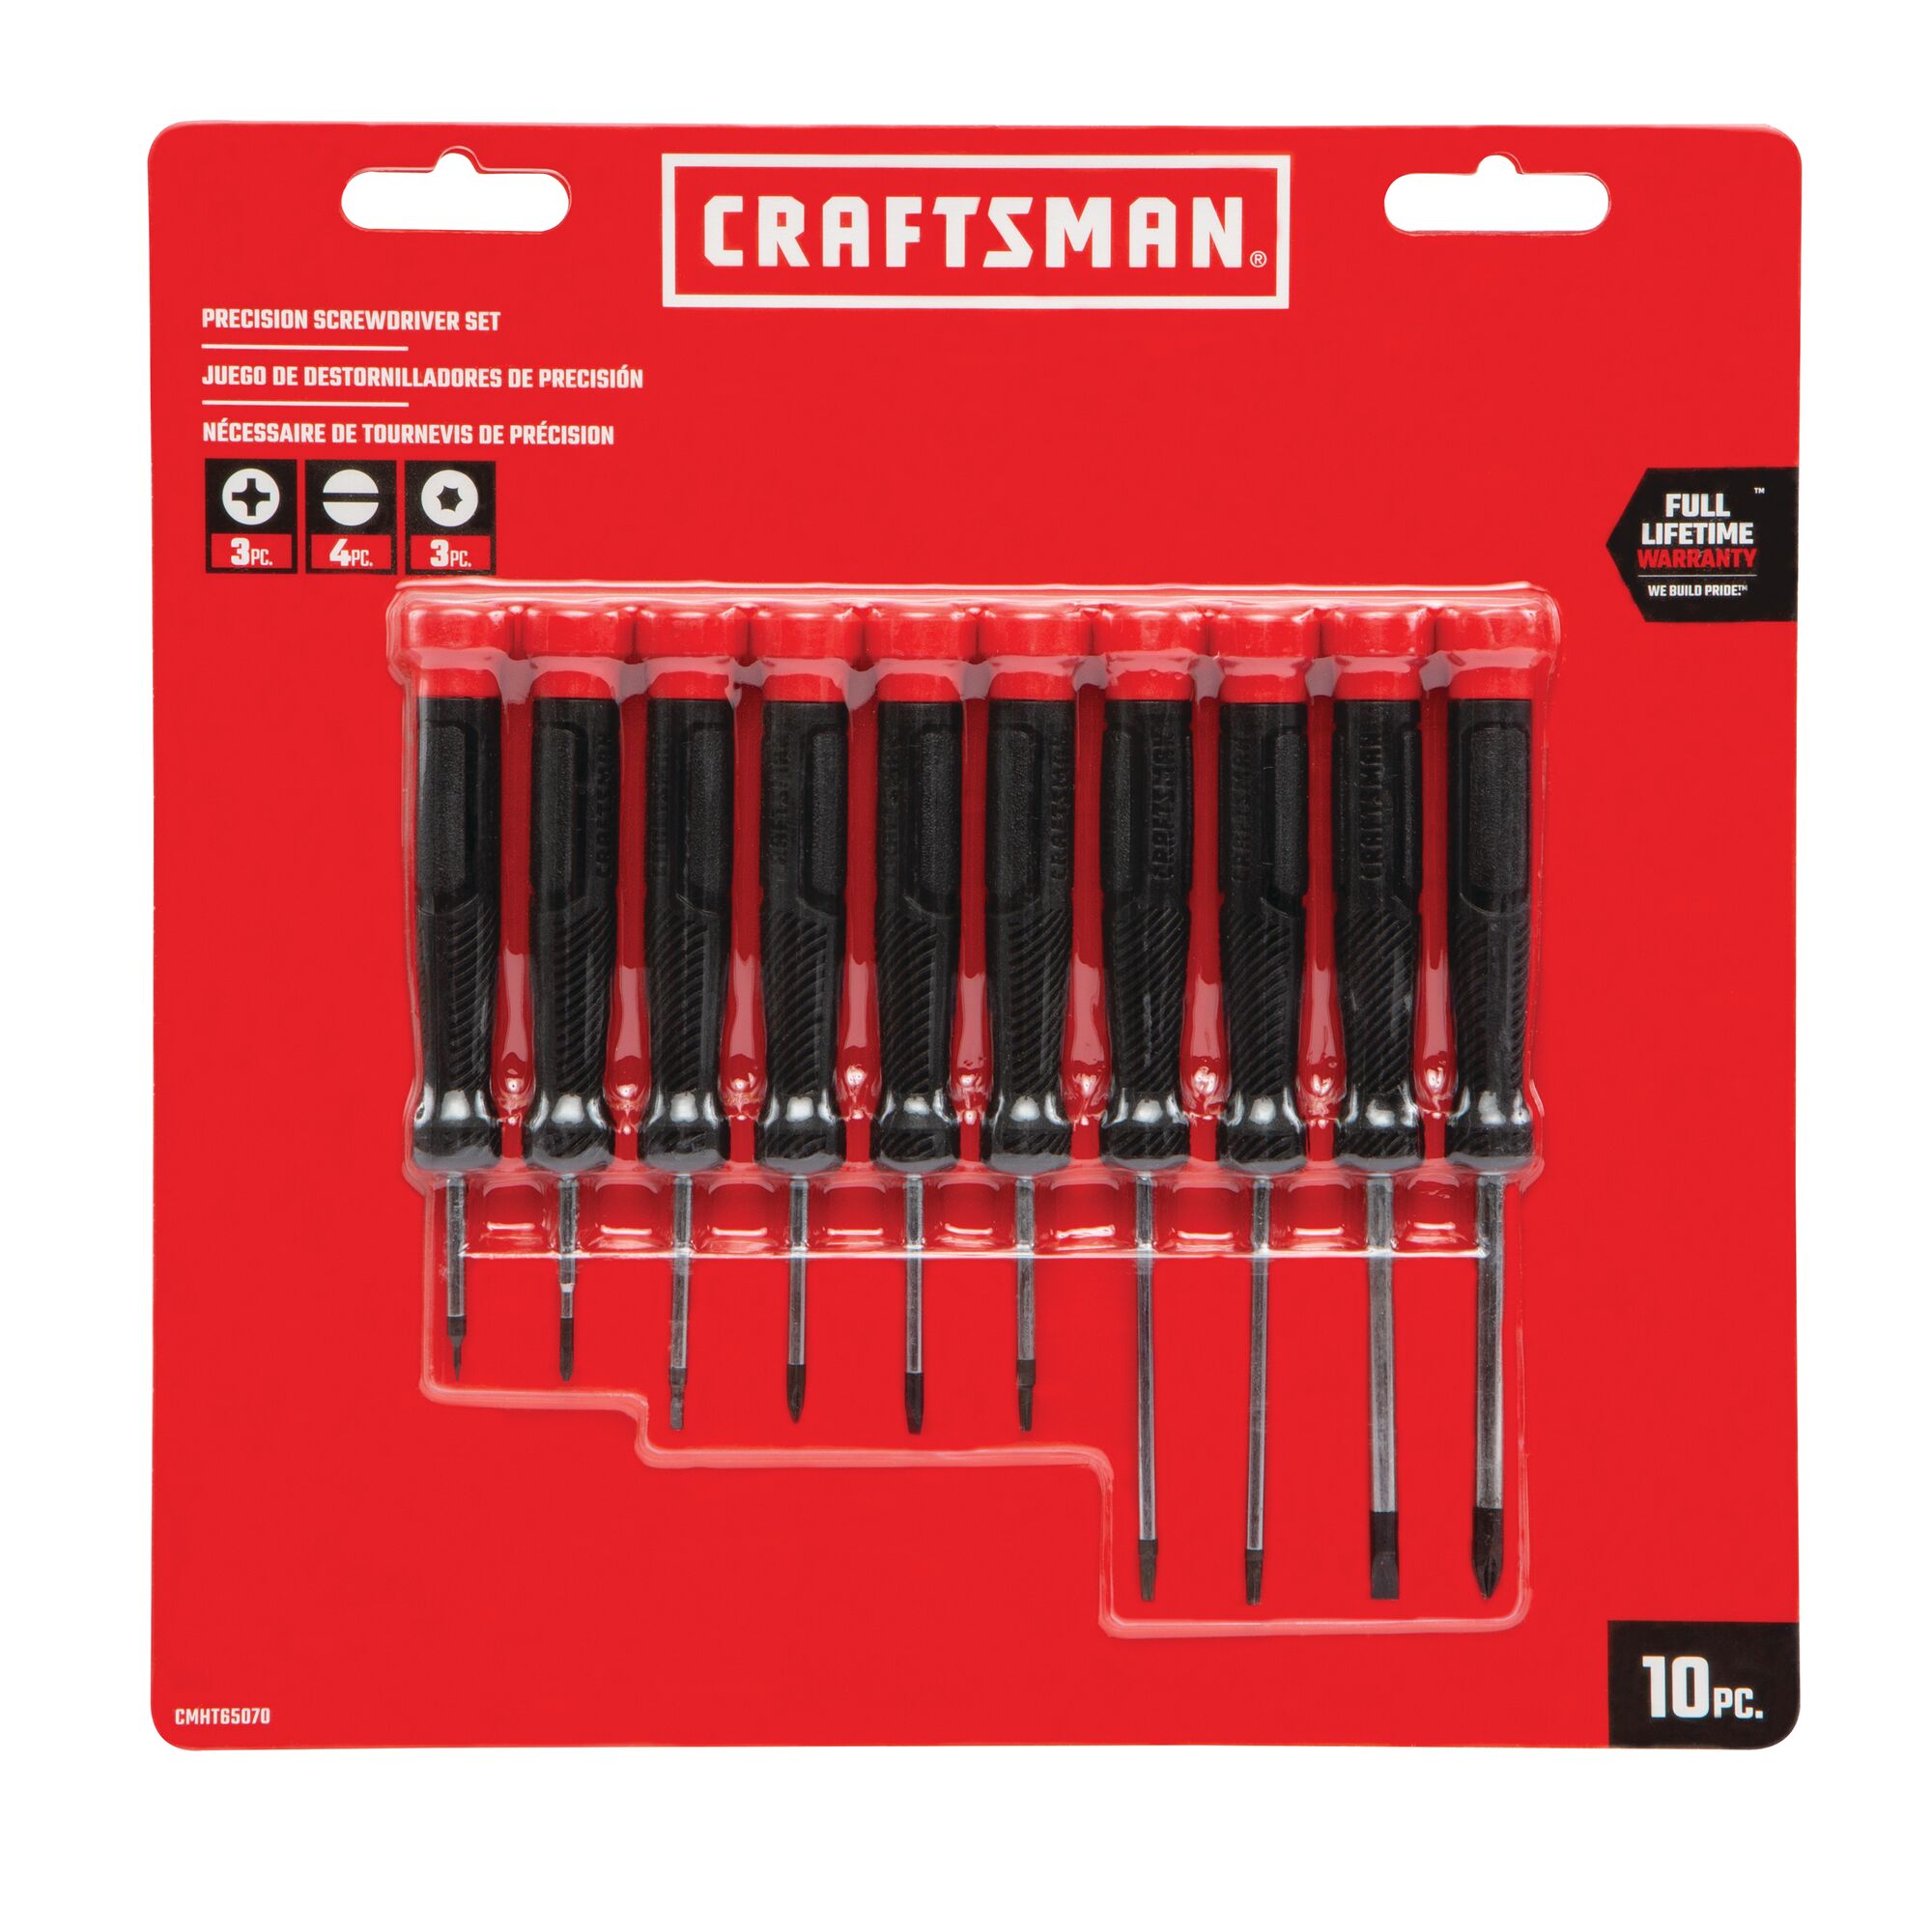 10 piece Precision Bi Material ScrewDriver Set in carded blister packaging.